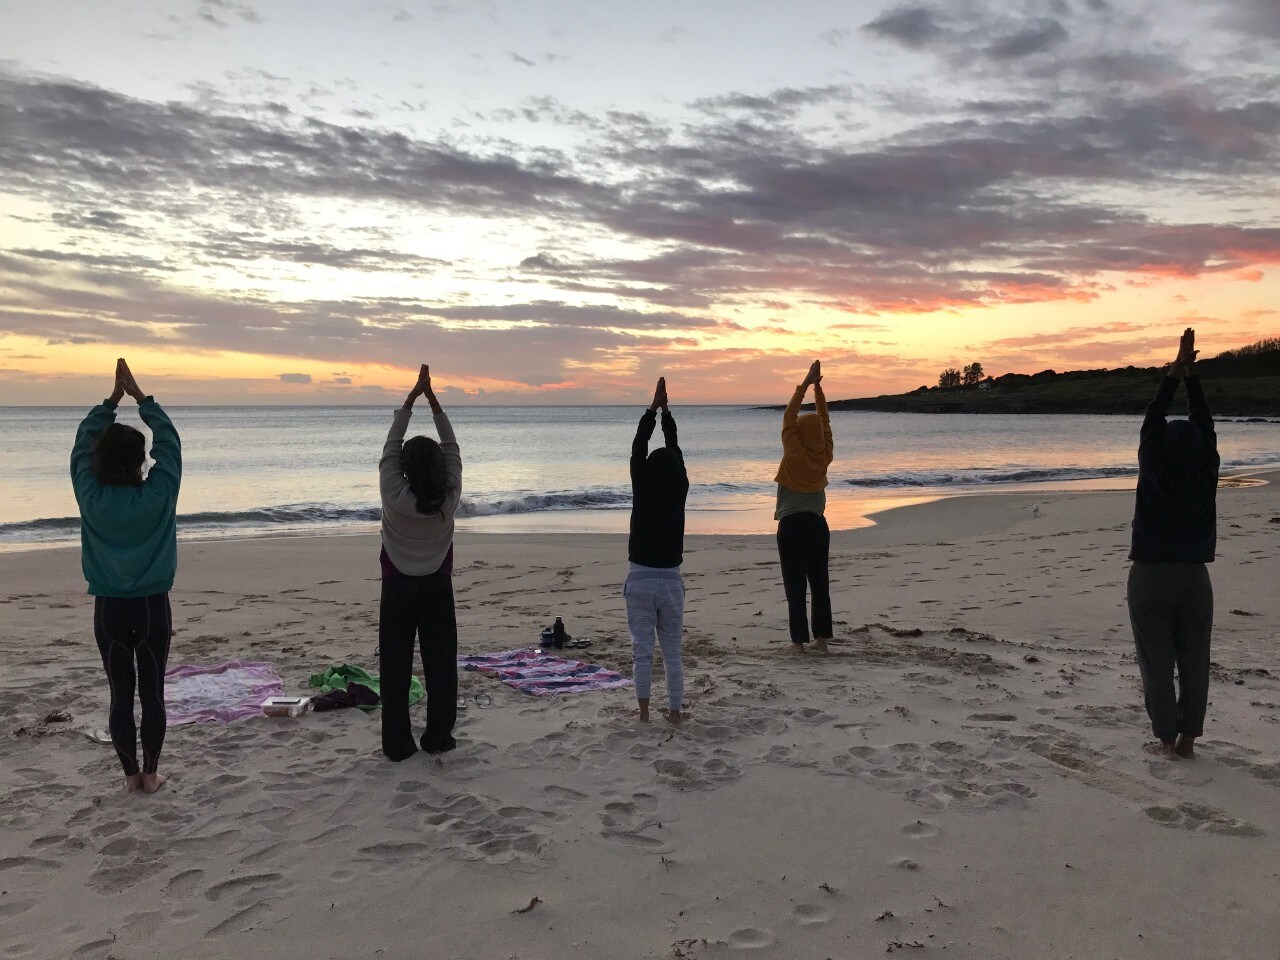 Five people standing on a beach doing making a prayer guesture with their arms up facing the ocean.